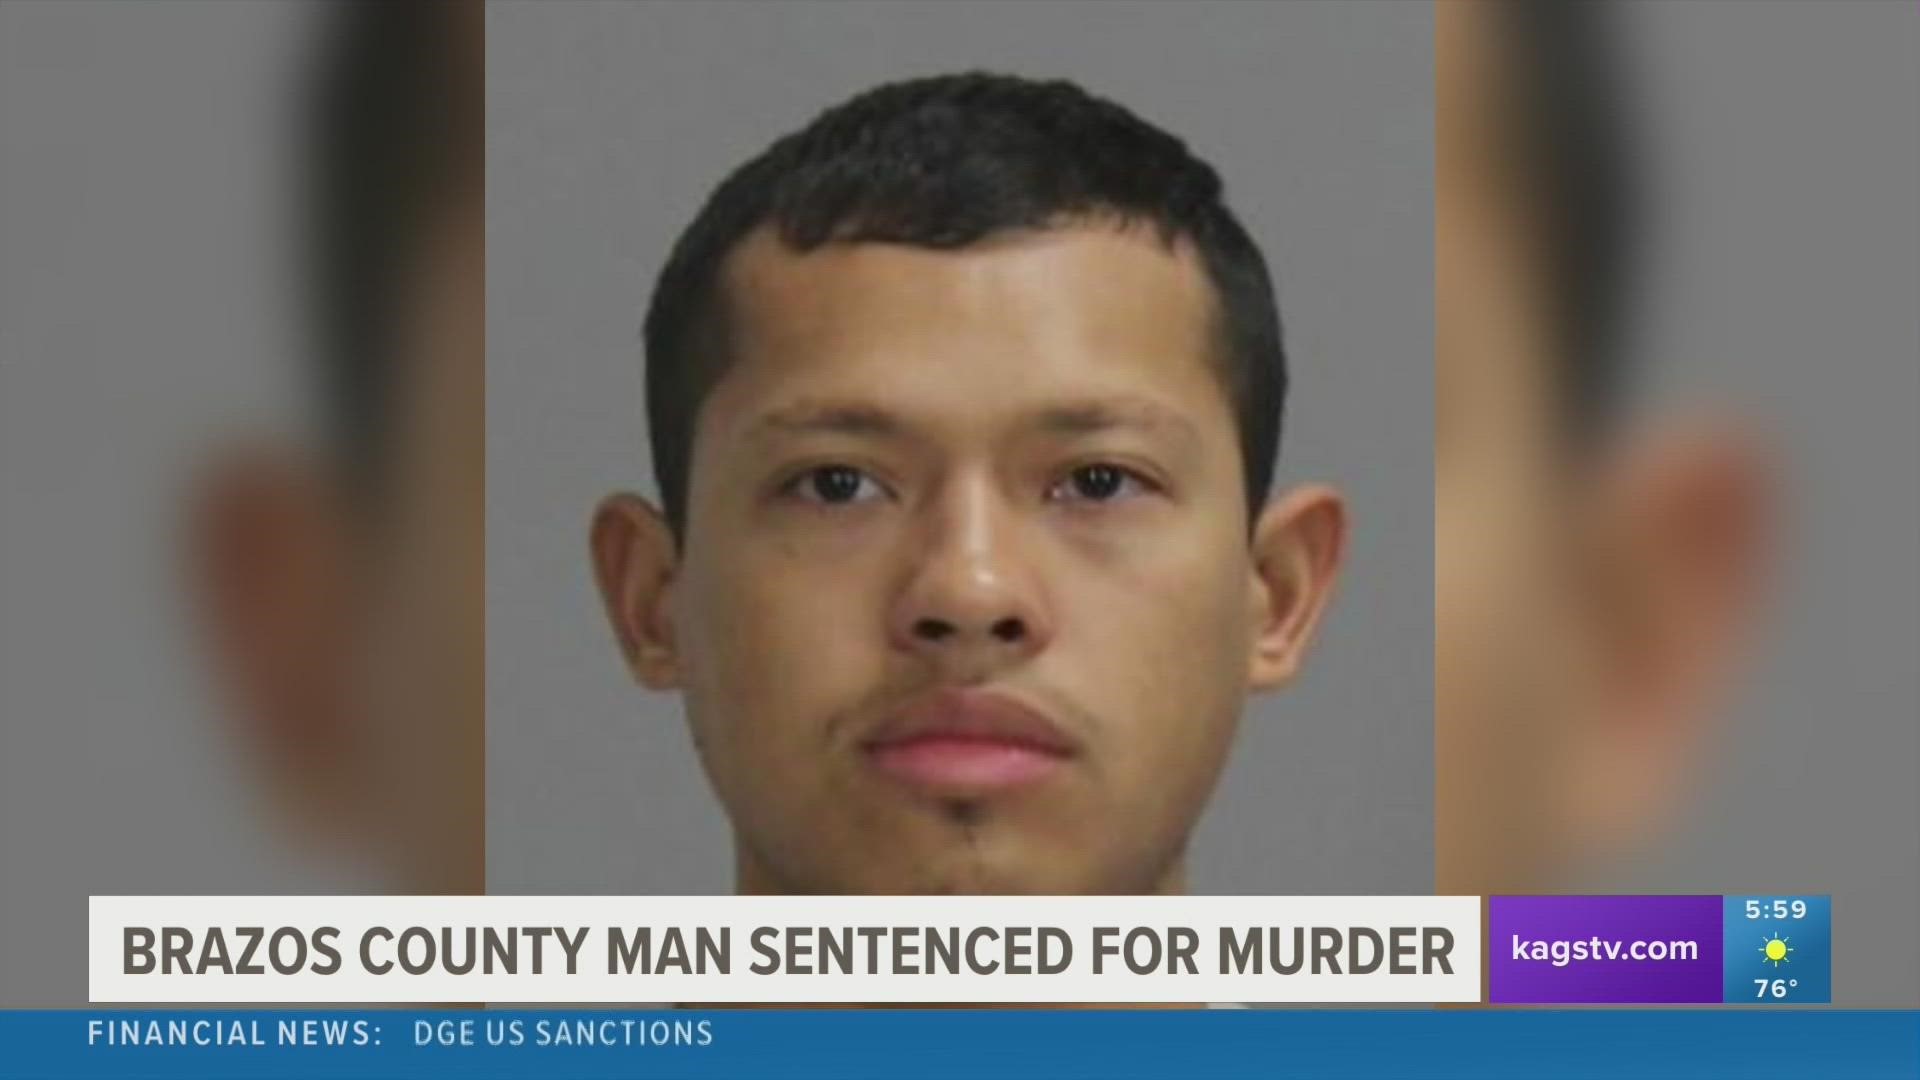 Ricardo Ramirez, the man in question, had recently been arrested at the time of the murder for drug-related charges.